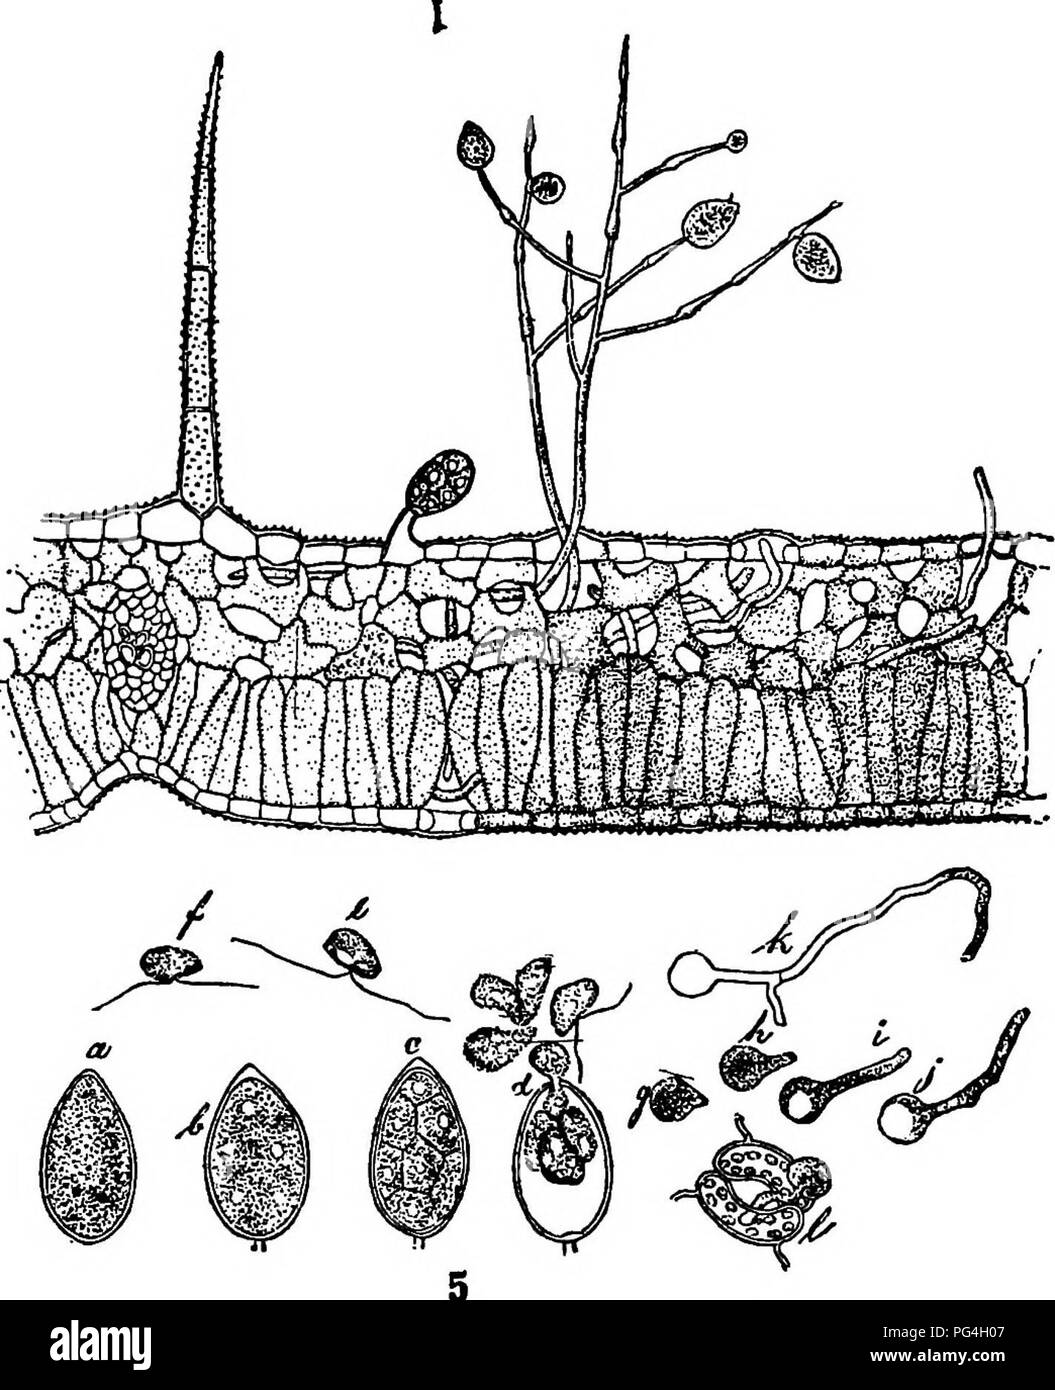 . The fungi which cause plant disease . Plant diseases; Fungi. THE FUNGI WHICH CAUSE PLANT DISEASE 87 oval, flattened biciliate zoospores which emerge from the conidia, swim about, come to rest, develop a wall, then produce a germ tube. Direct germination by a germ tube also occurs rarely. In-. FiG. 59.—P. infestans; 1, section showing conidiophores and conidia- formation; 5, germination of a conidia. After Scribner. fection is brought about by the germ tube, either by penetrating through stomata or directly through the epidermis. The walls and contents of parasitized cells are browned. When t Stock Photo